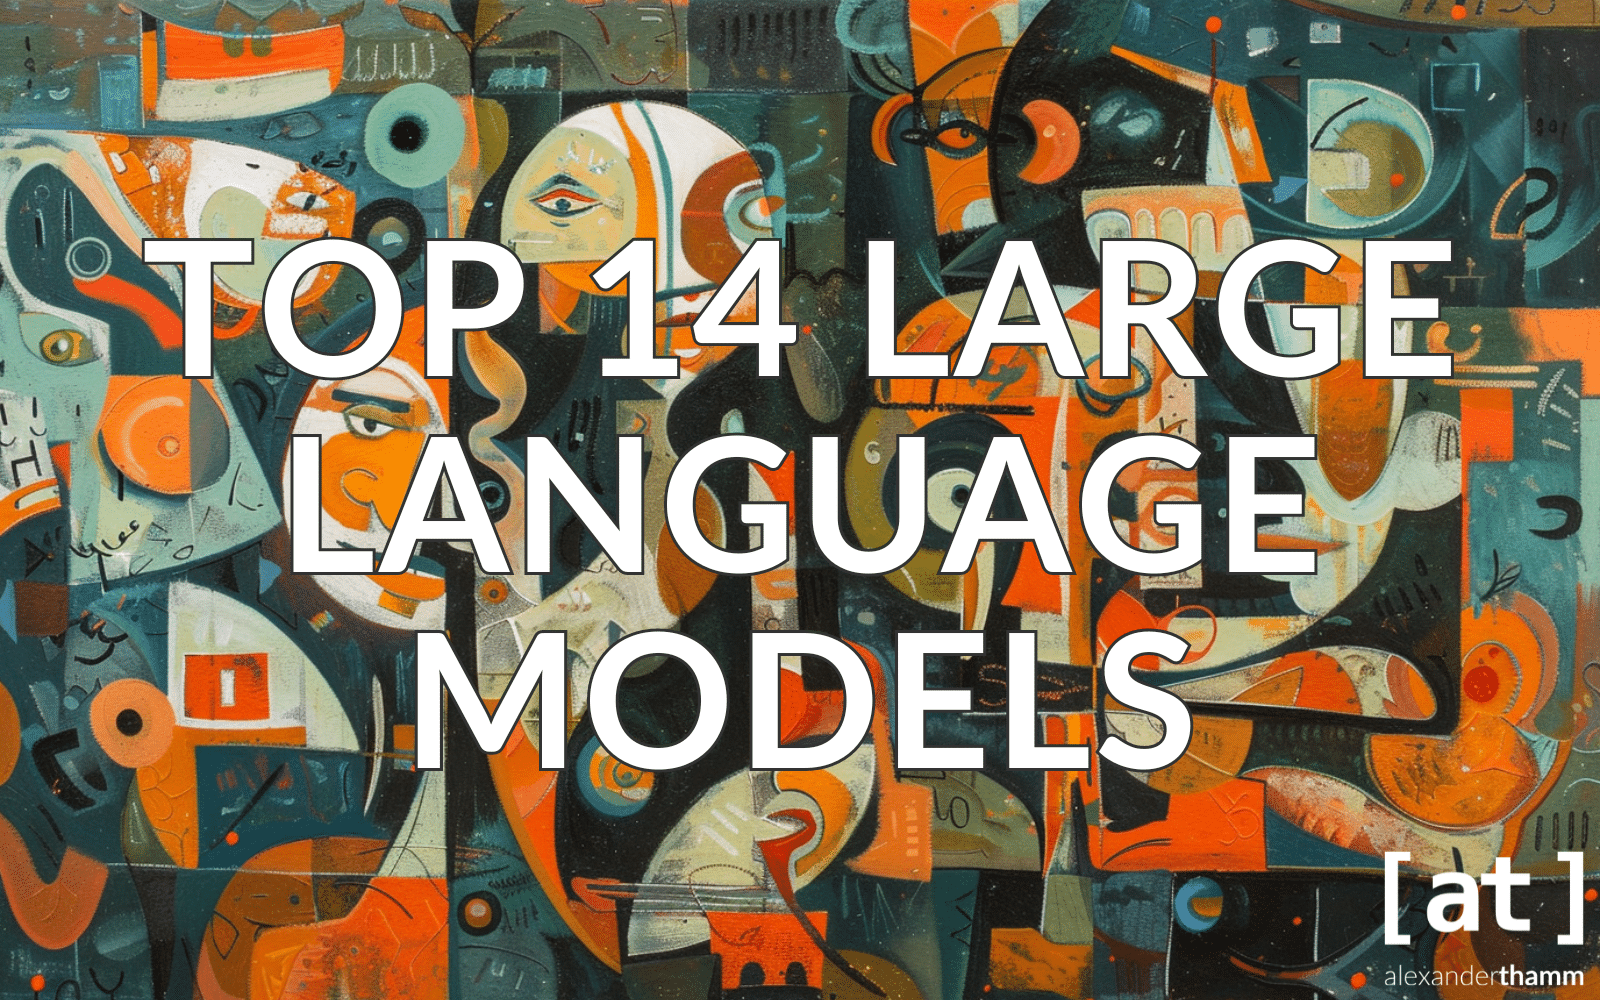 Top 14 LLMs in Business, a cubist collage of language